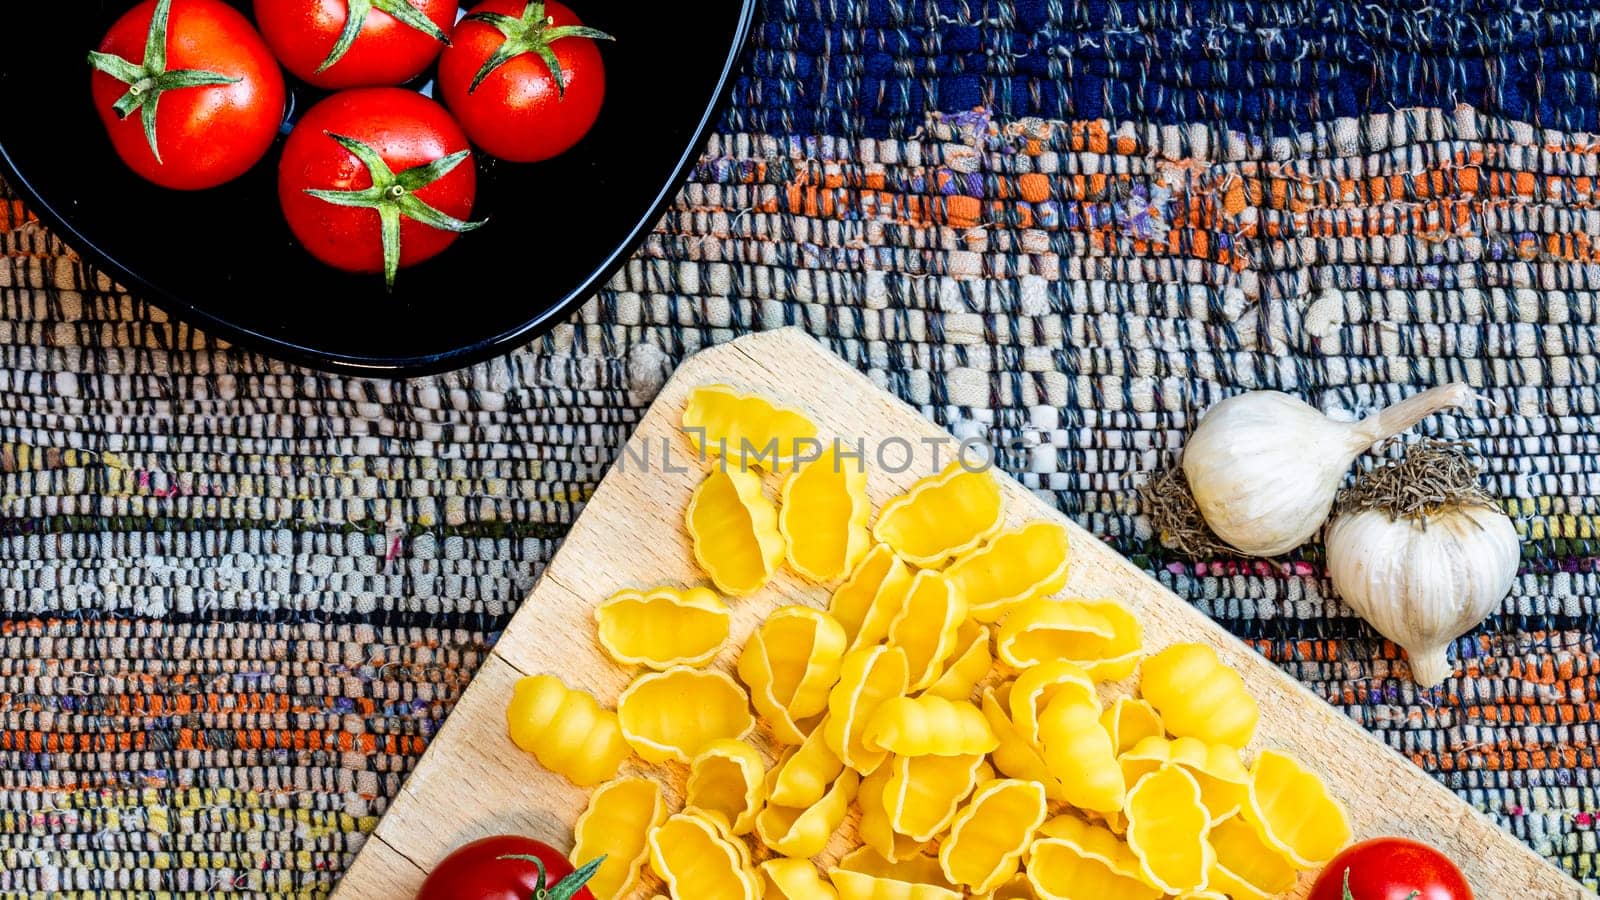 Top detail view of onions and fresh ripe cherry tomatoes in a black bowl on a rustic napkin. Ingredients and food concept